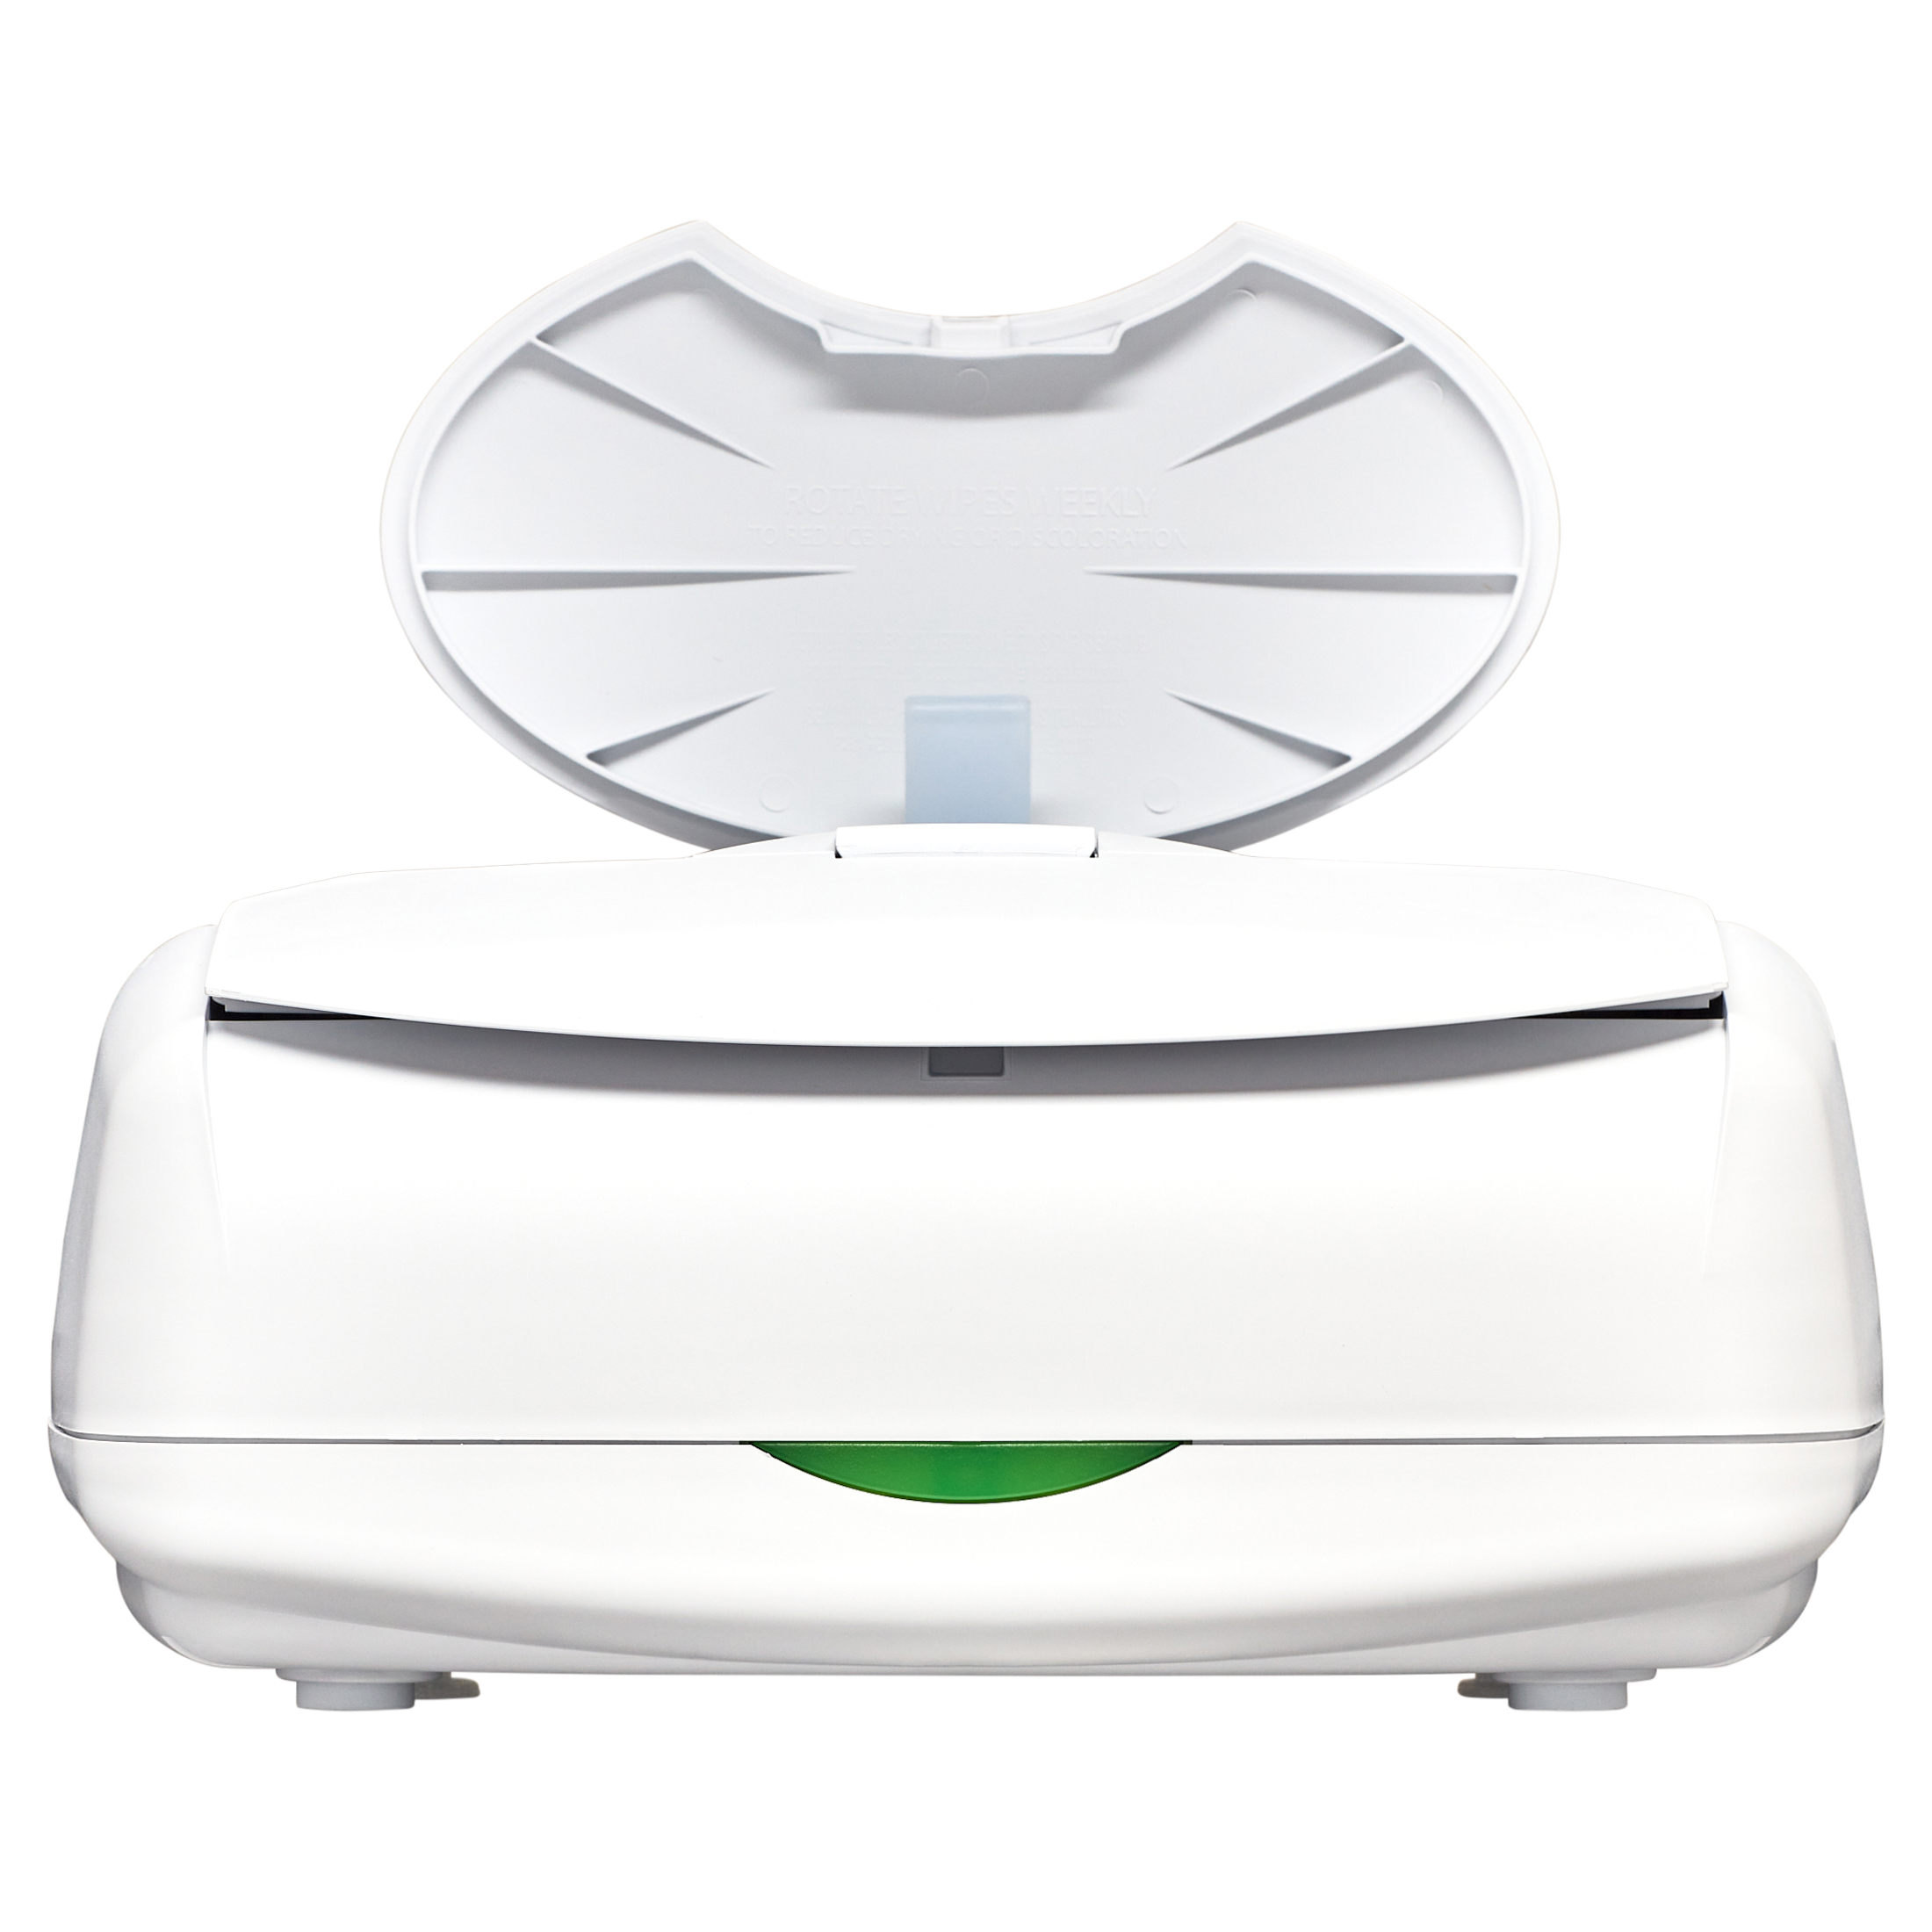 Prince Lionheart Ultimate Wipes Warmer with Integrated Nightlight and ever Fresh System for Pop-Up Wipe Access, No Dry Out - image 3 of 8